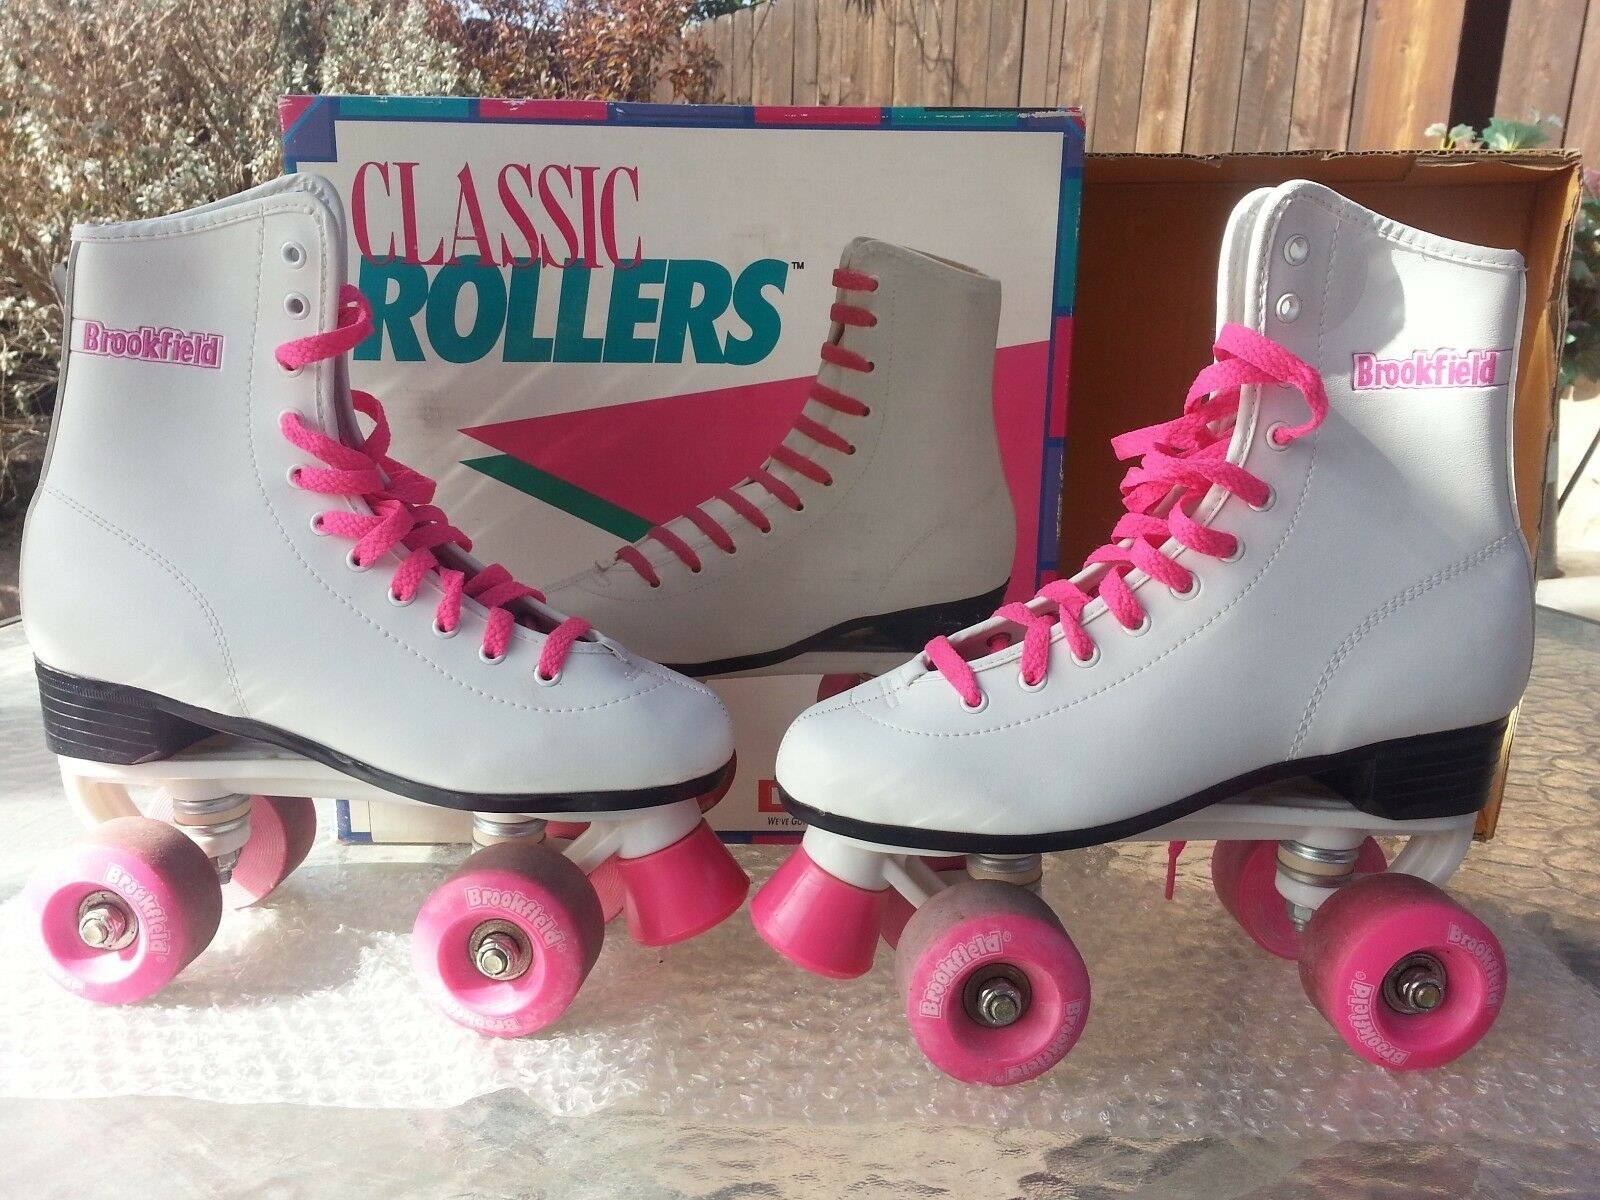 A pair of white roller skates with pink wheels and pink laces